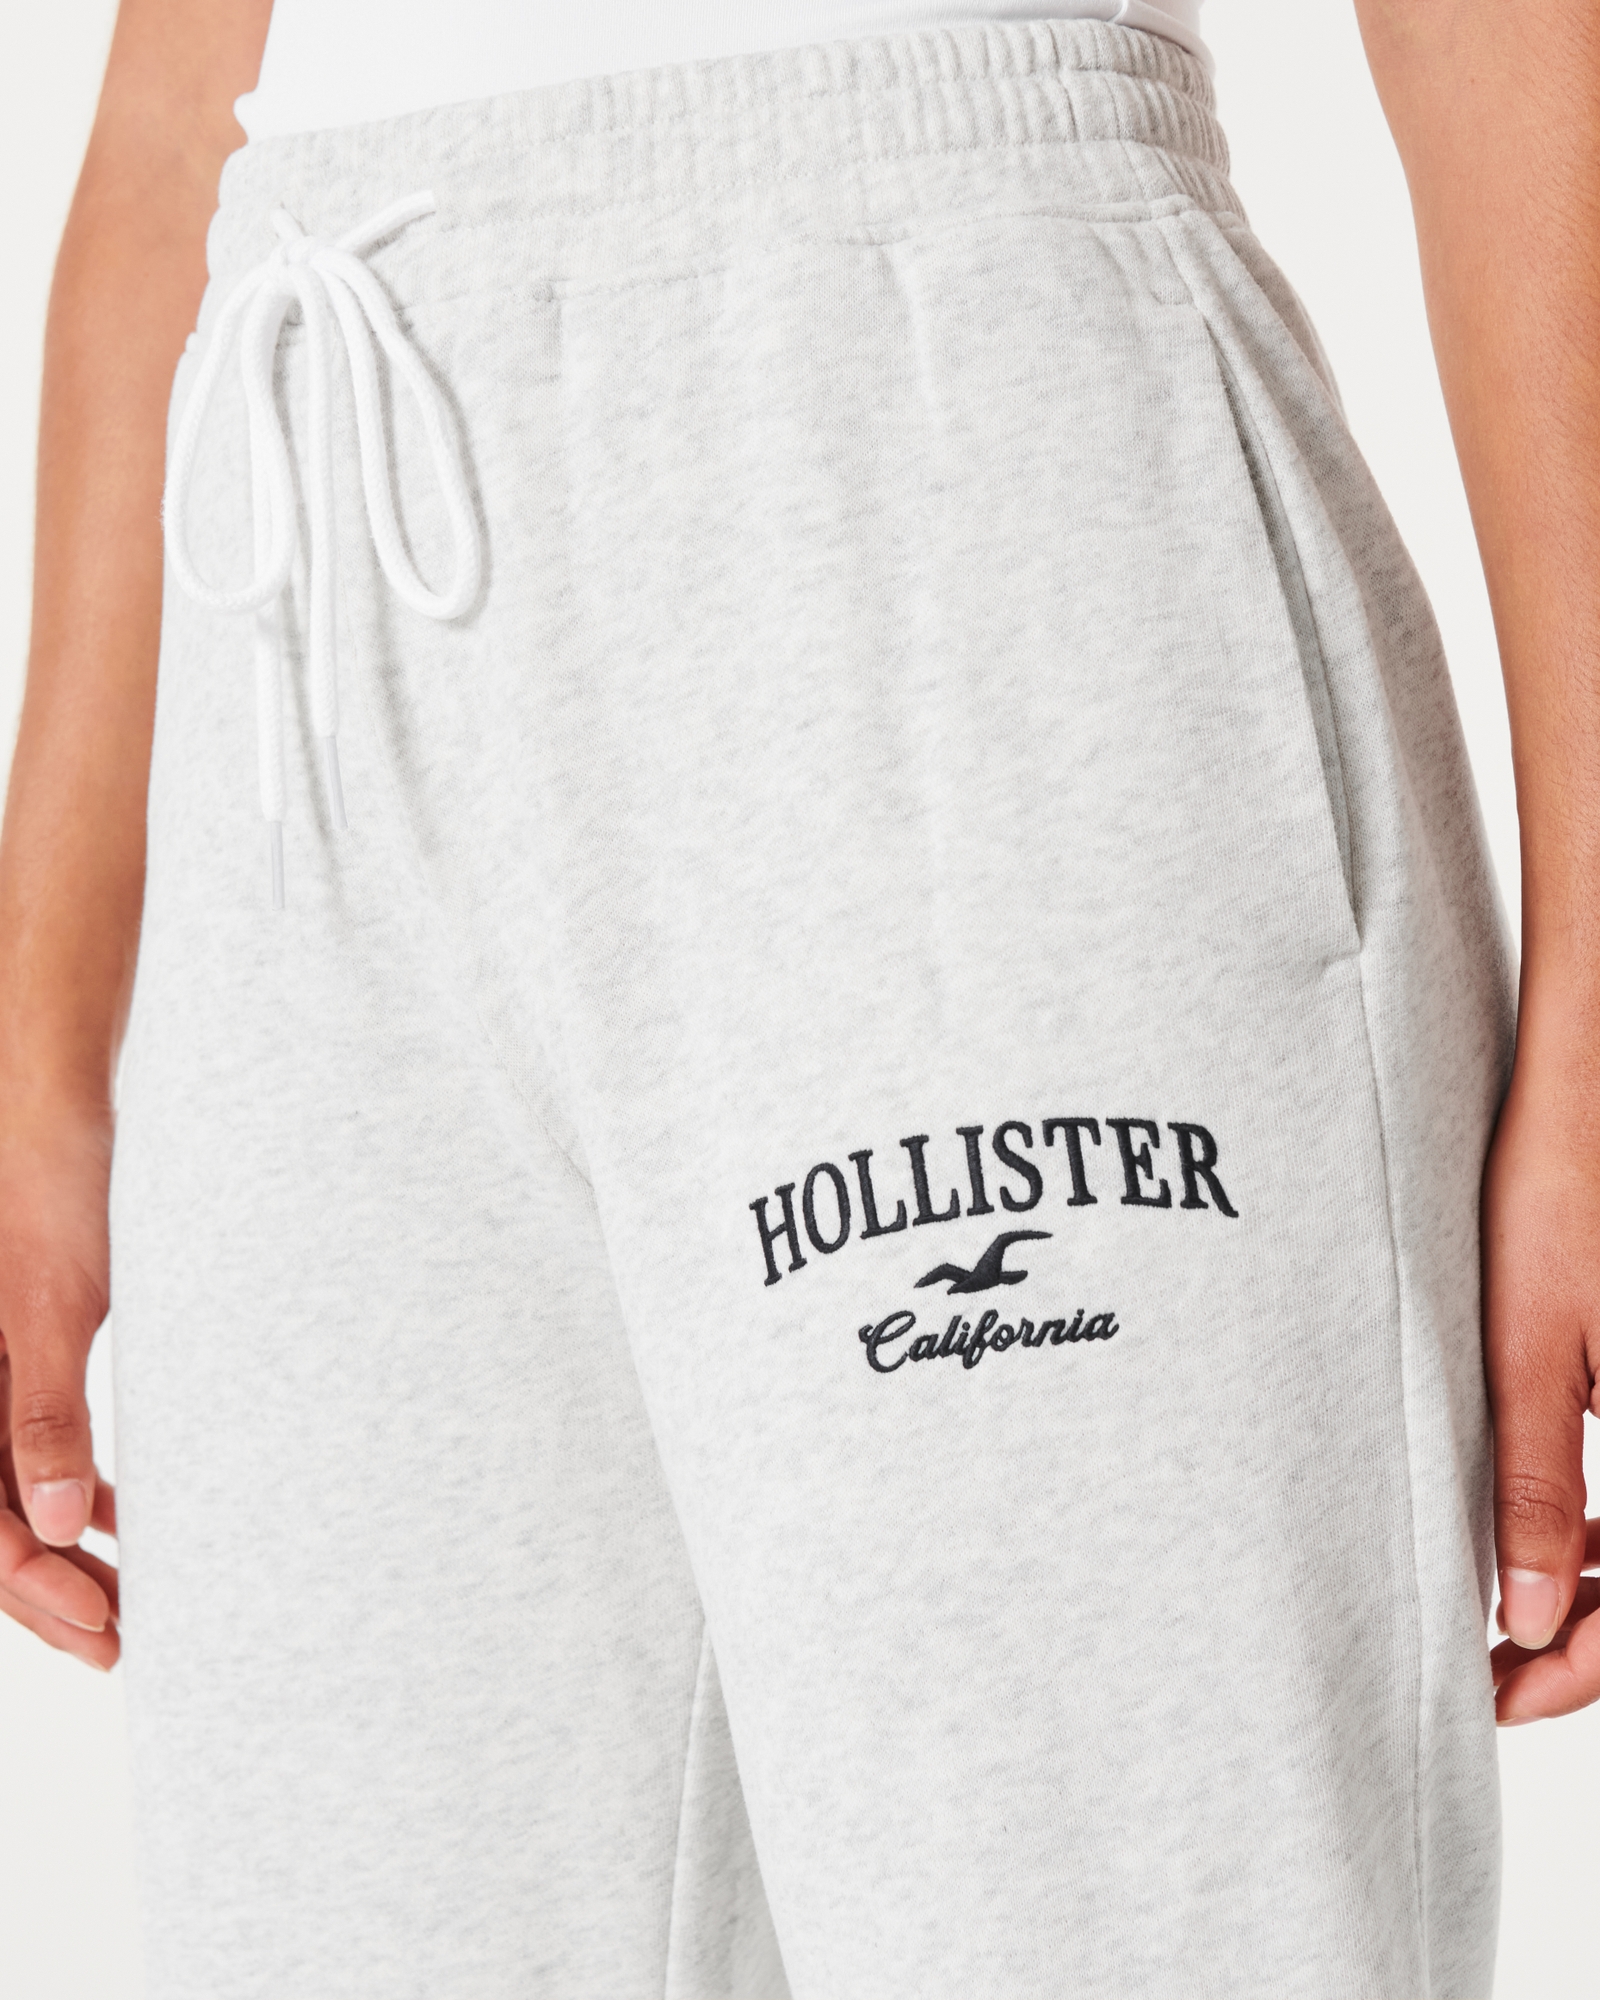 Hollister Graphic Fleece Leggings from Hollister on 21 Buttons